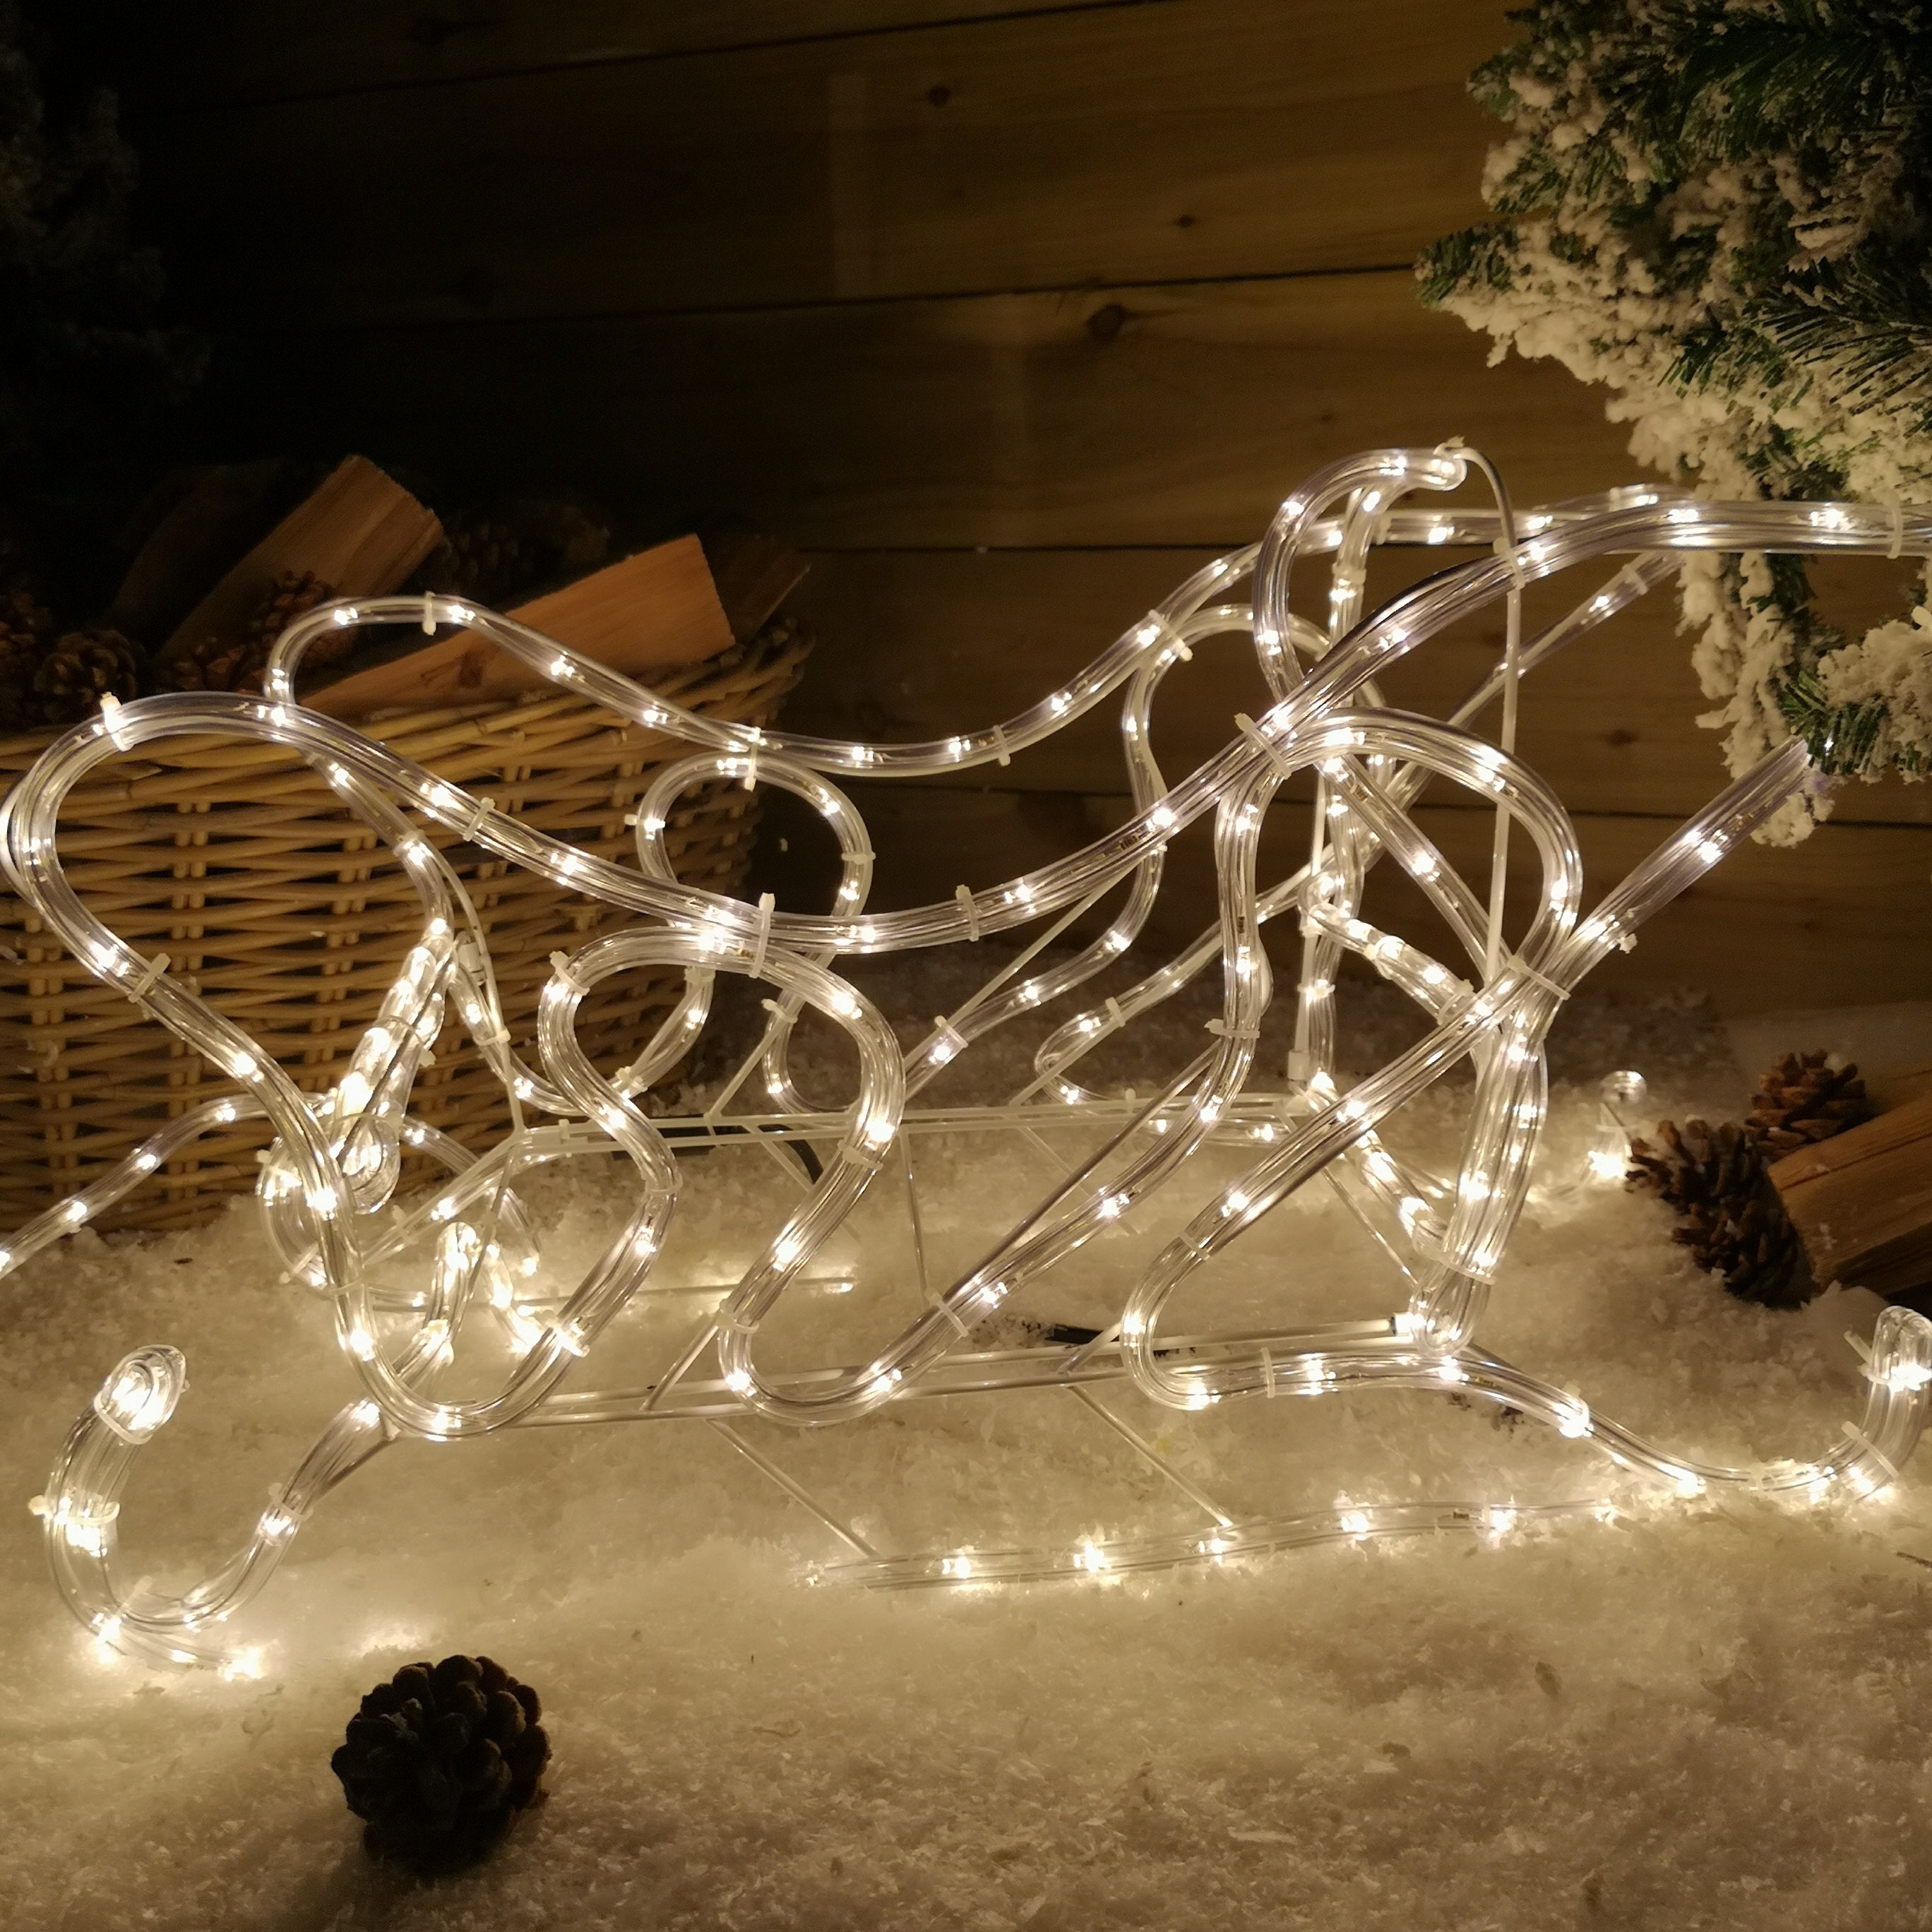 1.4m LED Rope Light Reindeer with Sleigh Christmas Decoration in White